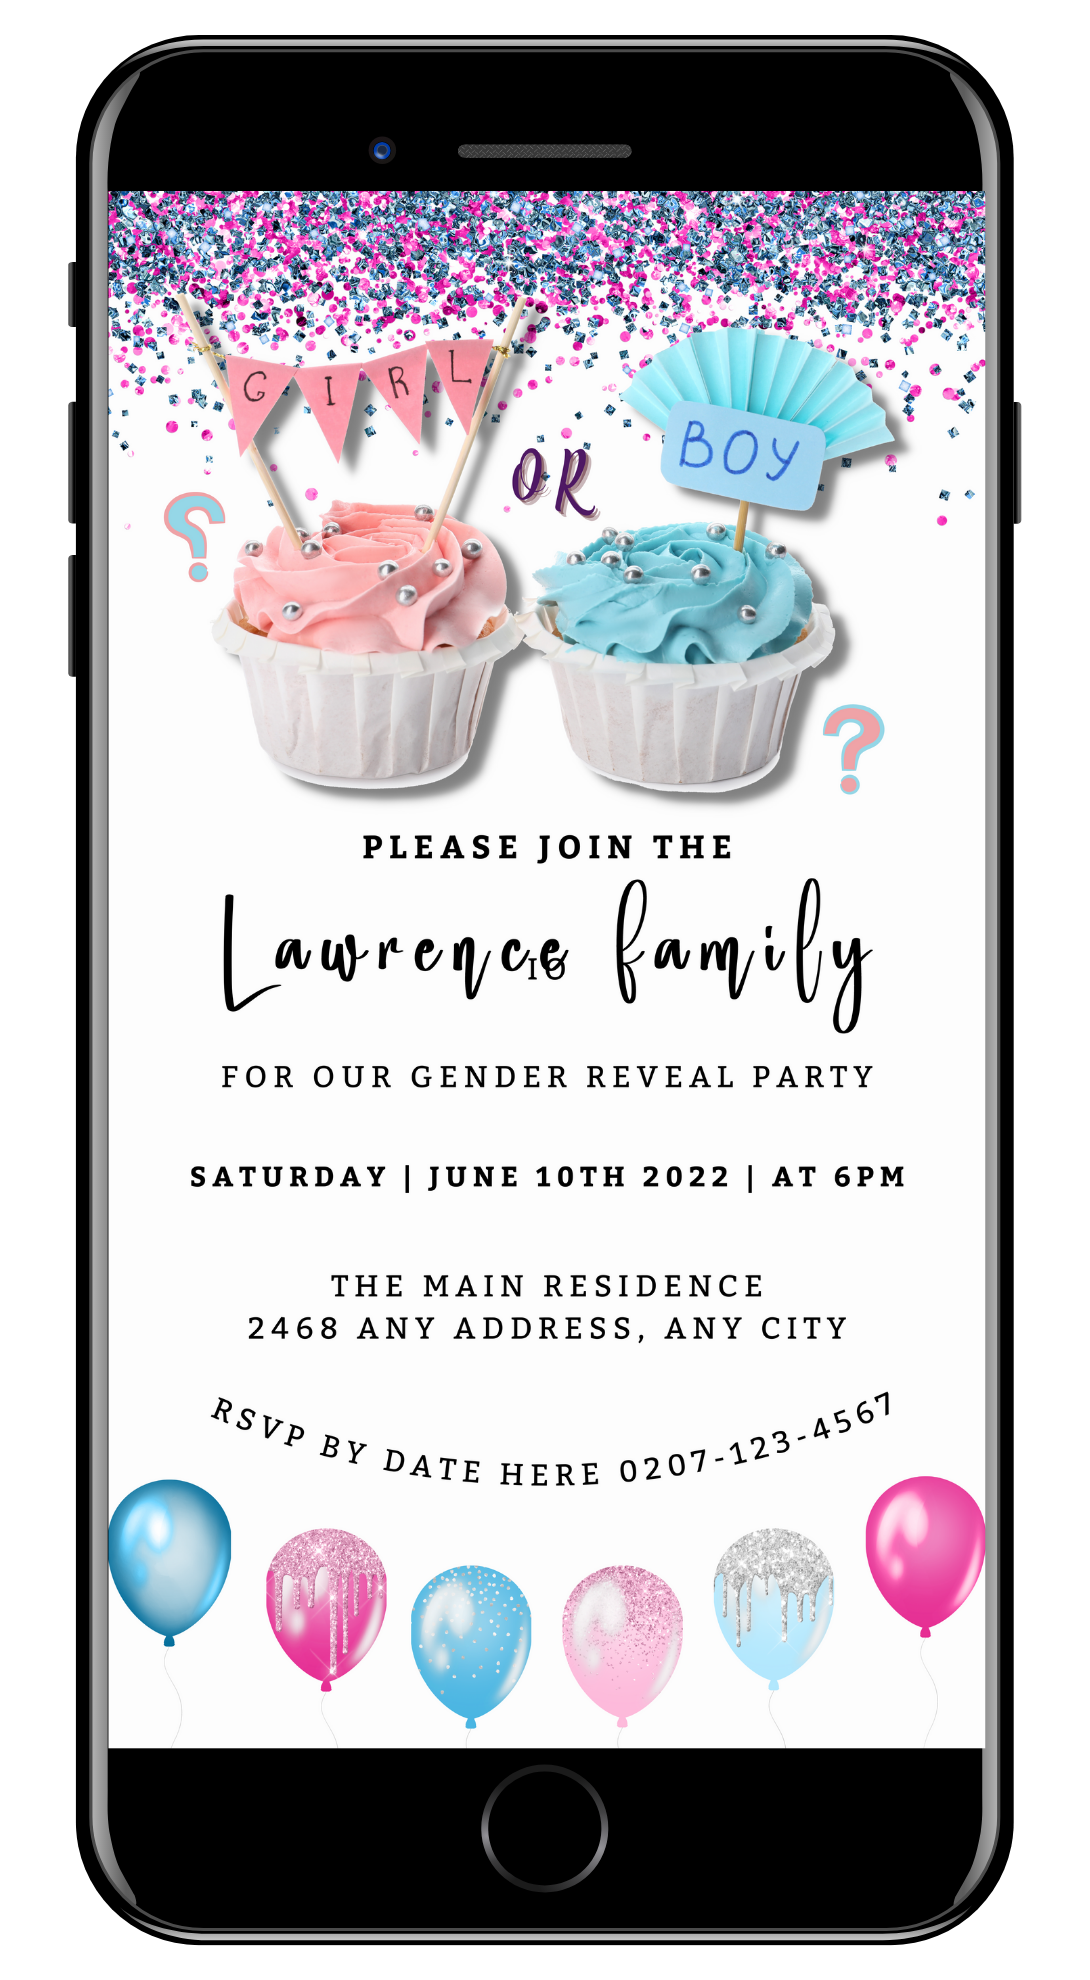 Customisable Gender Reveal Evite featuring cupcakes, balloons, and confetti on a smartphone screen, editable via Canva for personal event invitations.